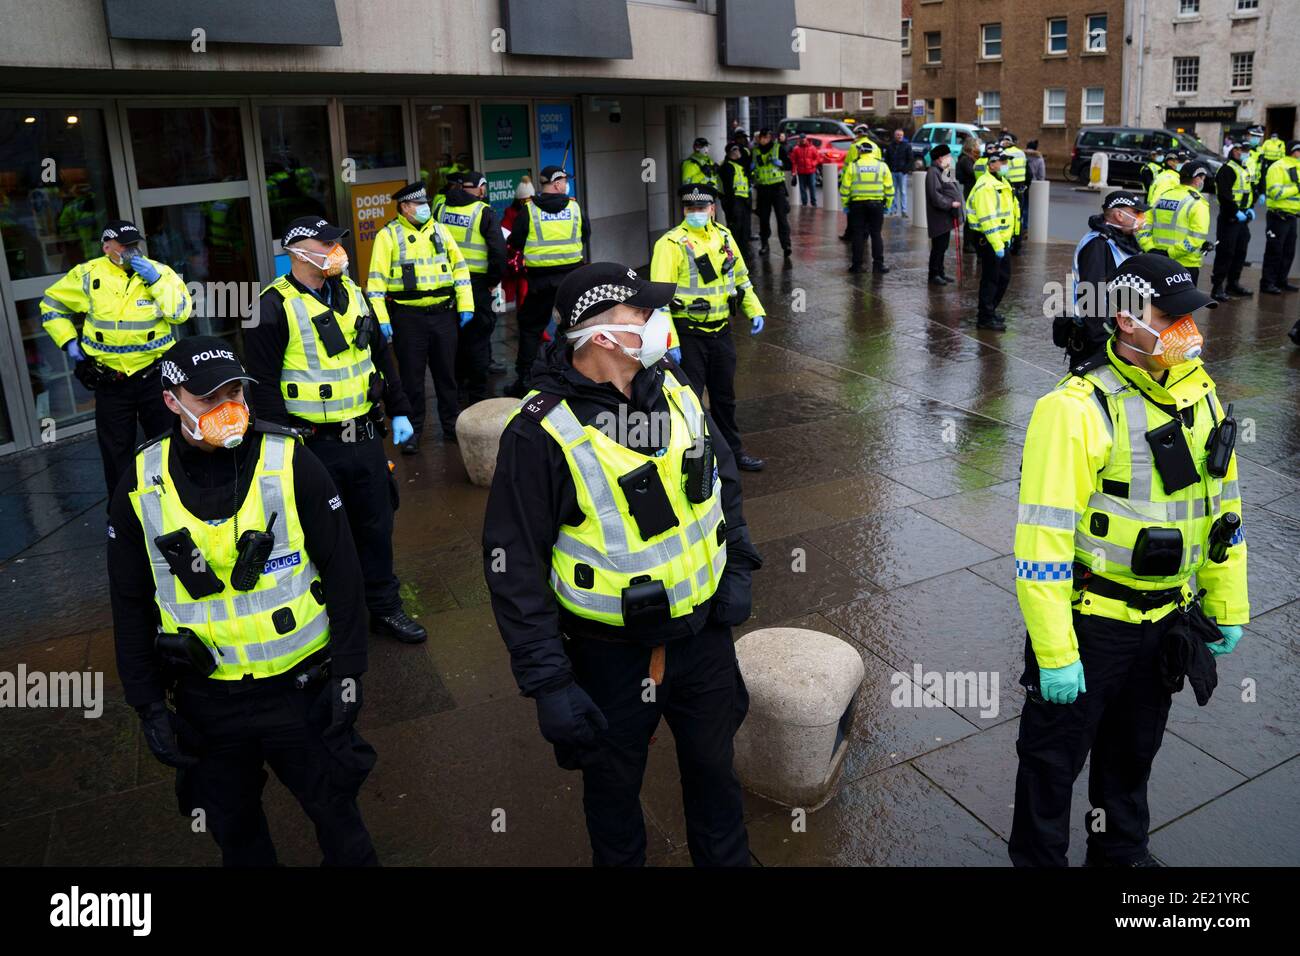 Edinburgh, Scotland, UK. 11 January 2021. Protester arrested in violent scenes at anti lockdown demonstration at Scottish Parliament in Edinburgh today. Several protesters took part but  a heavy and aggressive police presence prevented demonstration and planned march to Bute House. During national Covid-19 lockdown such protests are illegal and police advised people not to attend the demonstration. Iain Masterton/Alamy Live News Stock Photo